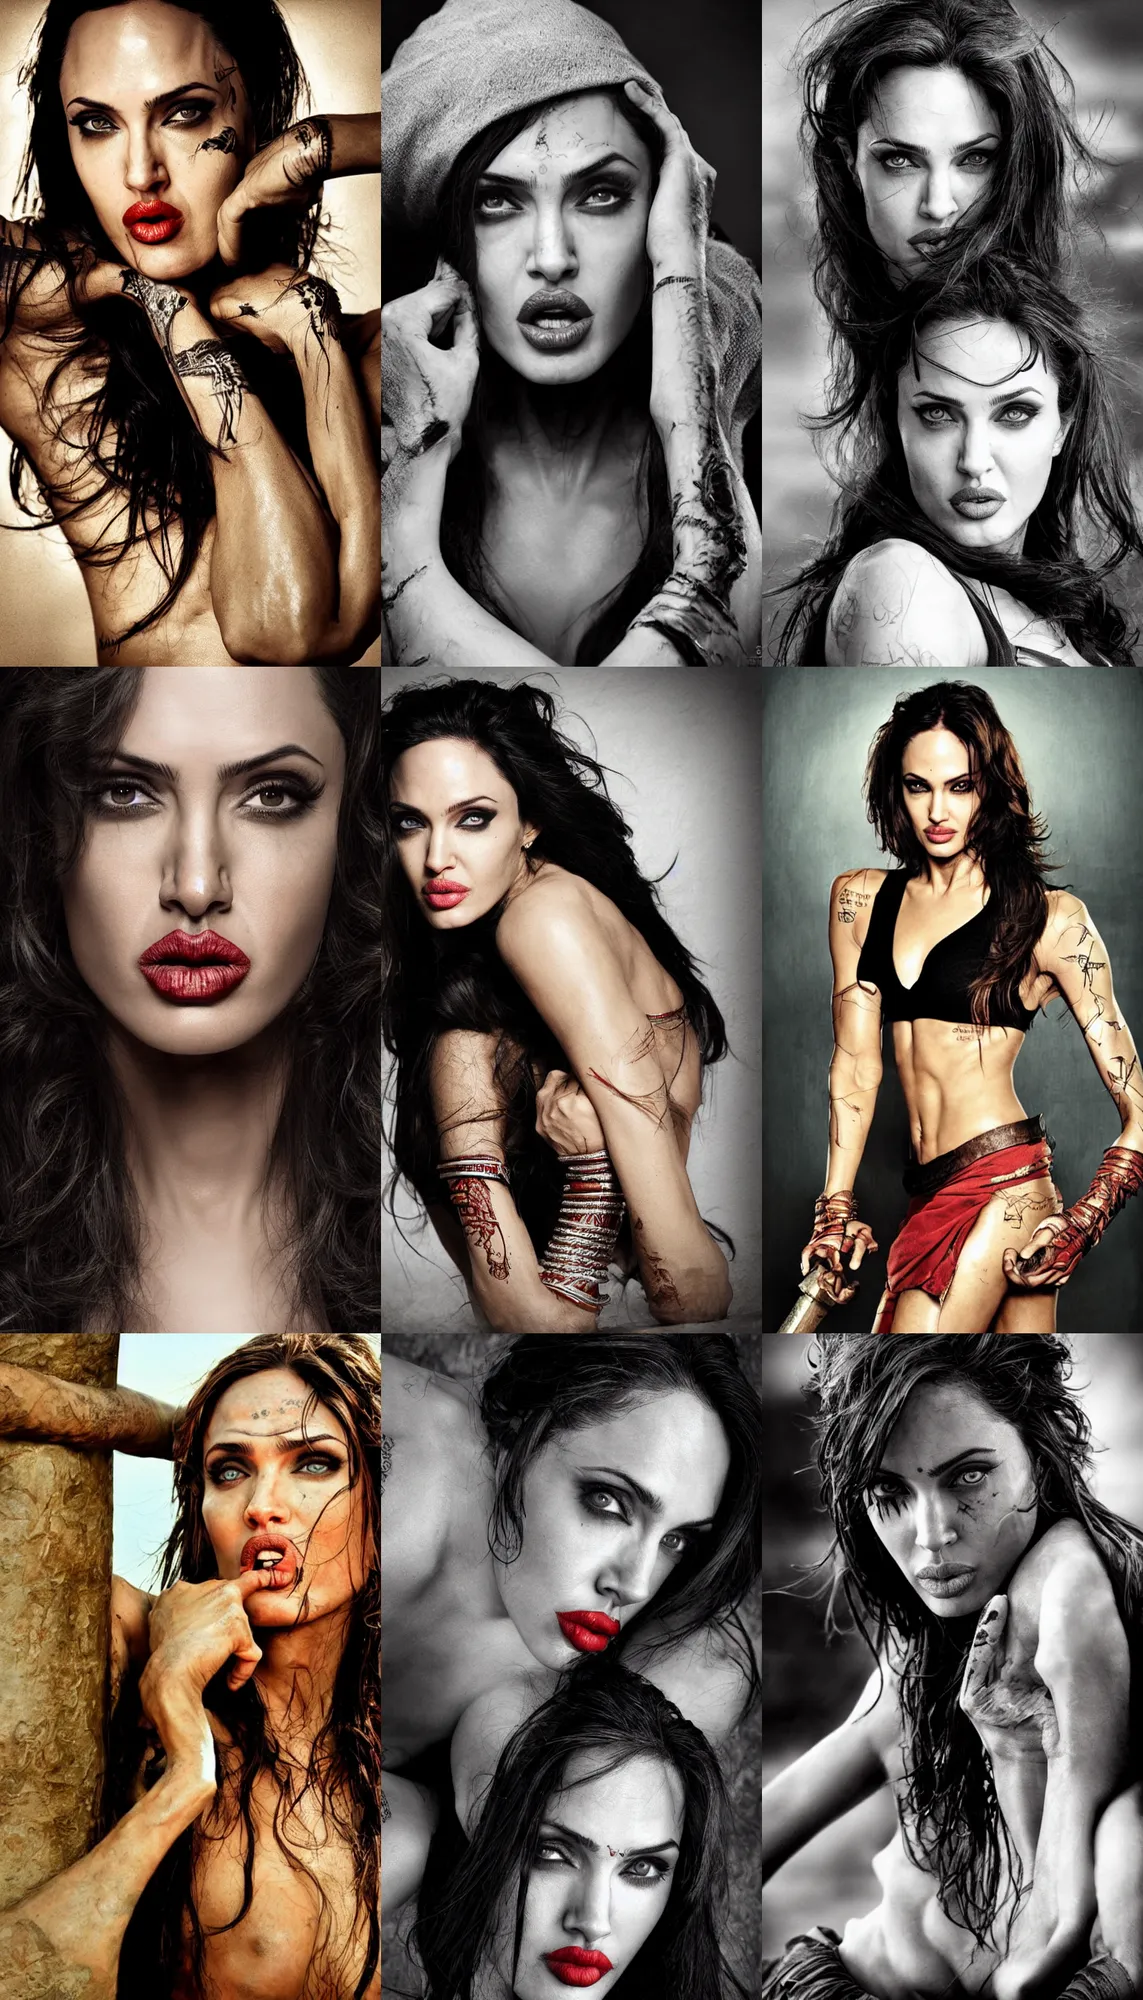 Prompt: photo, fighting, warrior, action, provocative indian, nose of Angelina Jolie, lips of Megan Fox, award winning photography by Leonardo Espina